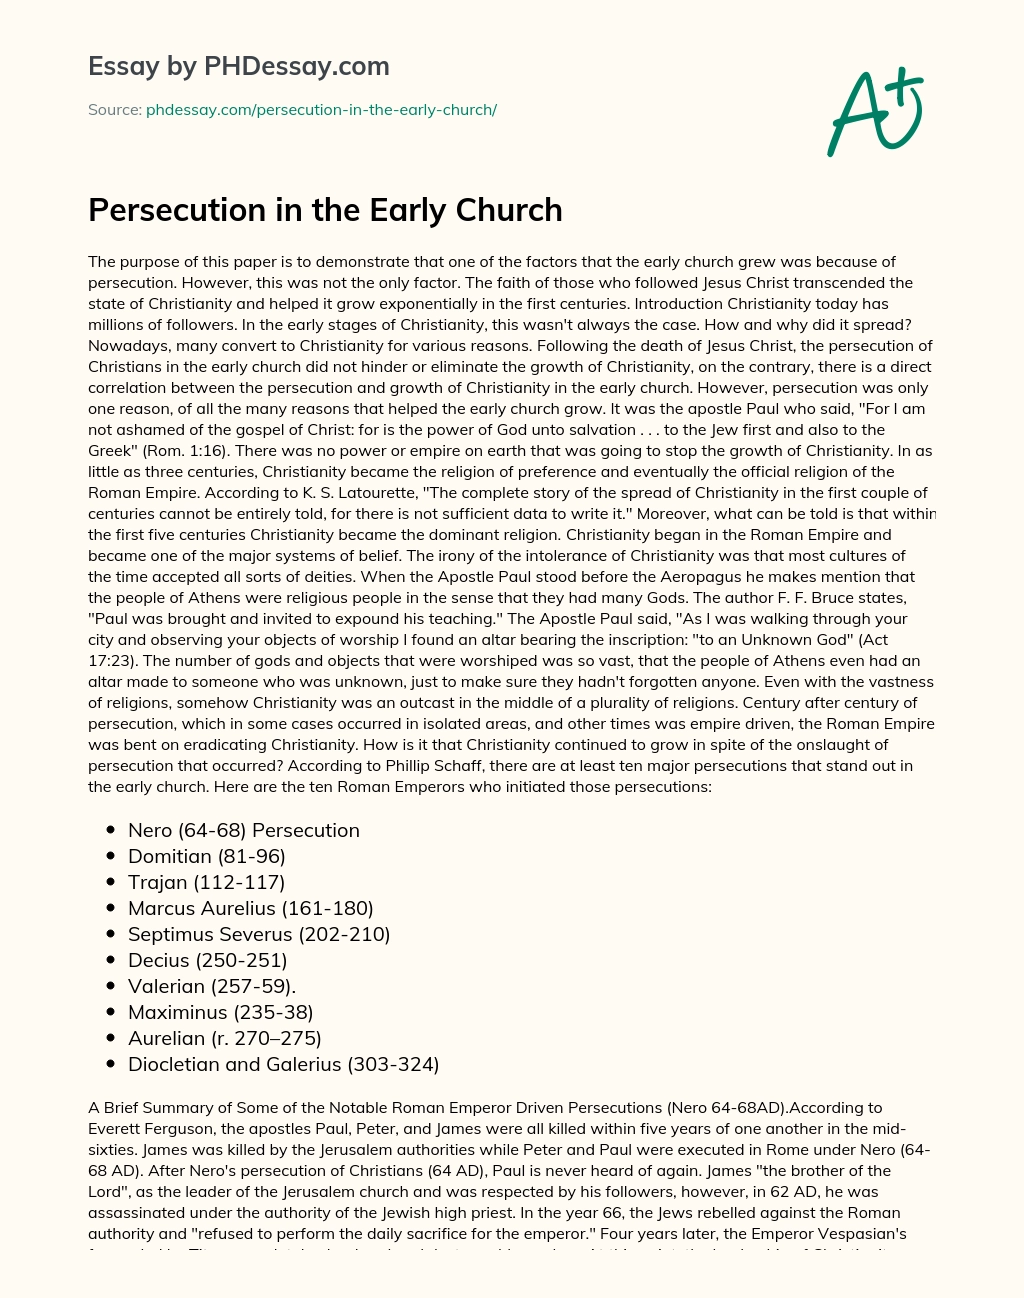 Persecution in the Early Church essay